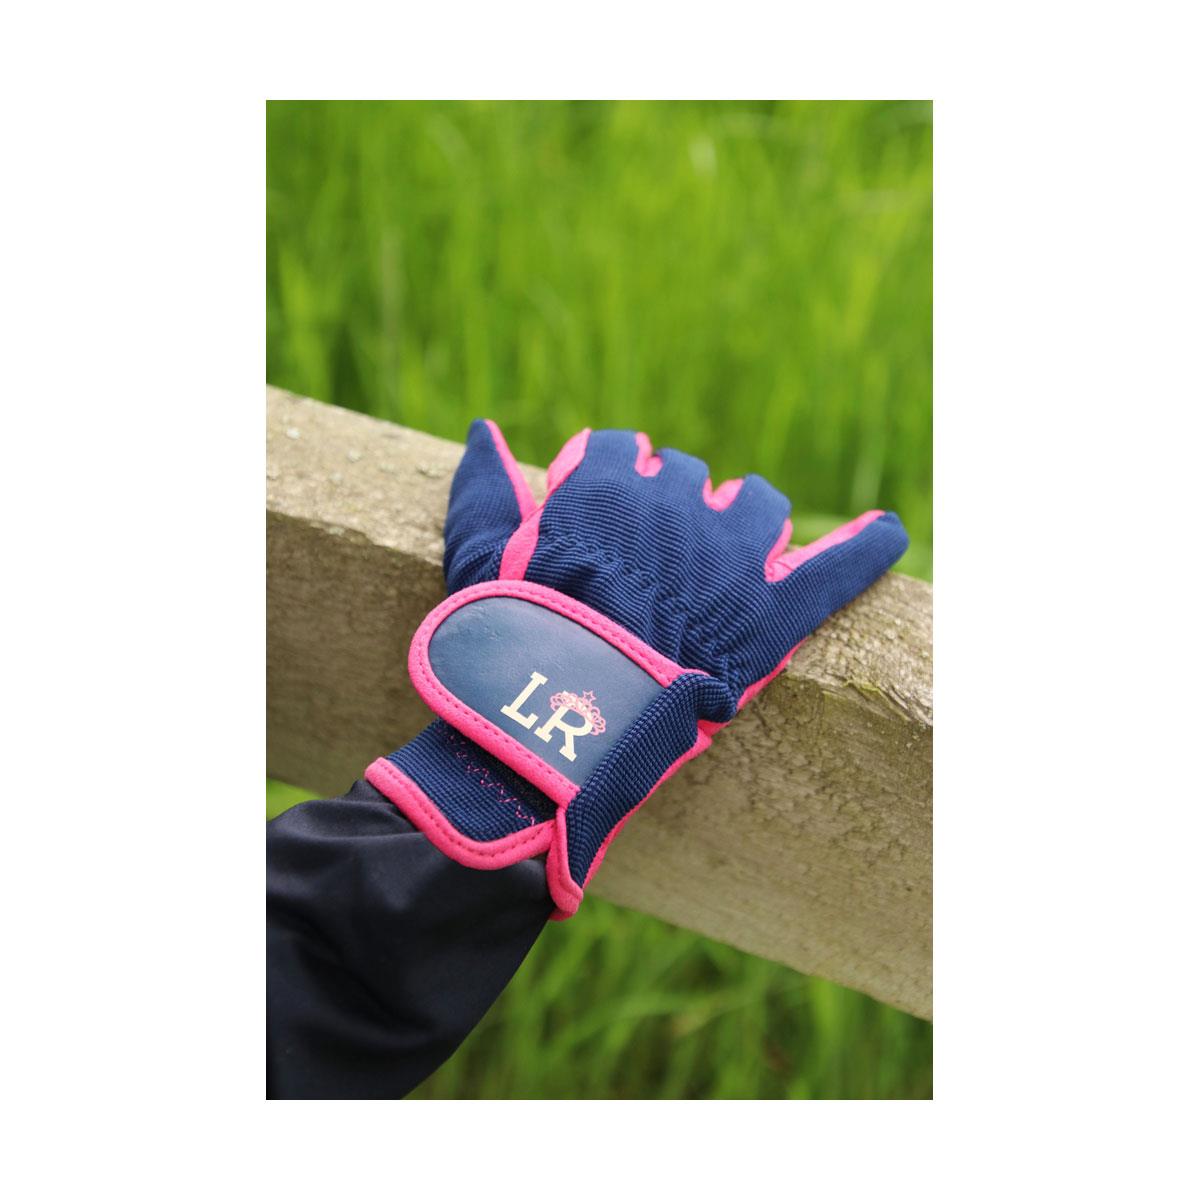 Stacy Childrens Horse Riding Gloves by Little Rider - Just Horse Riders